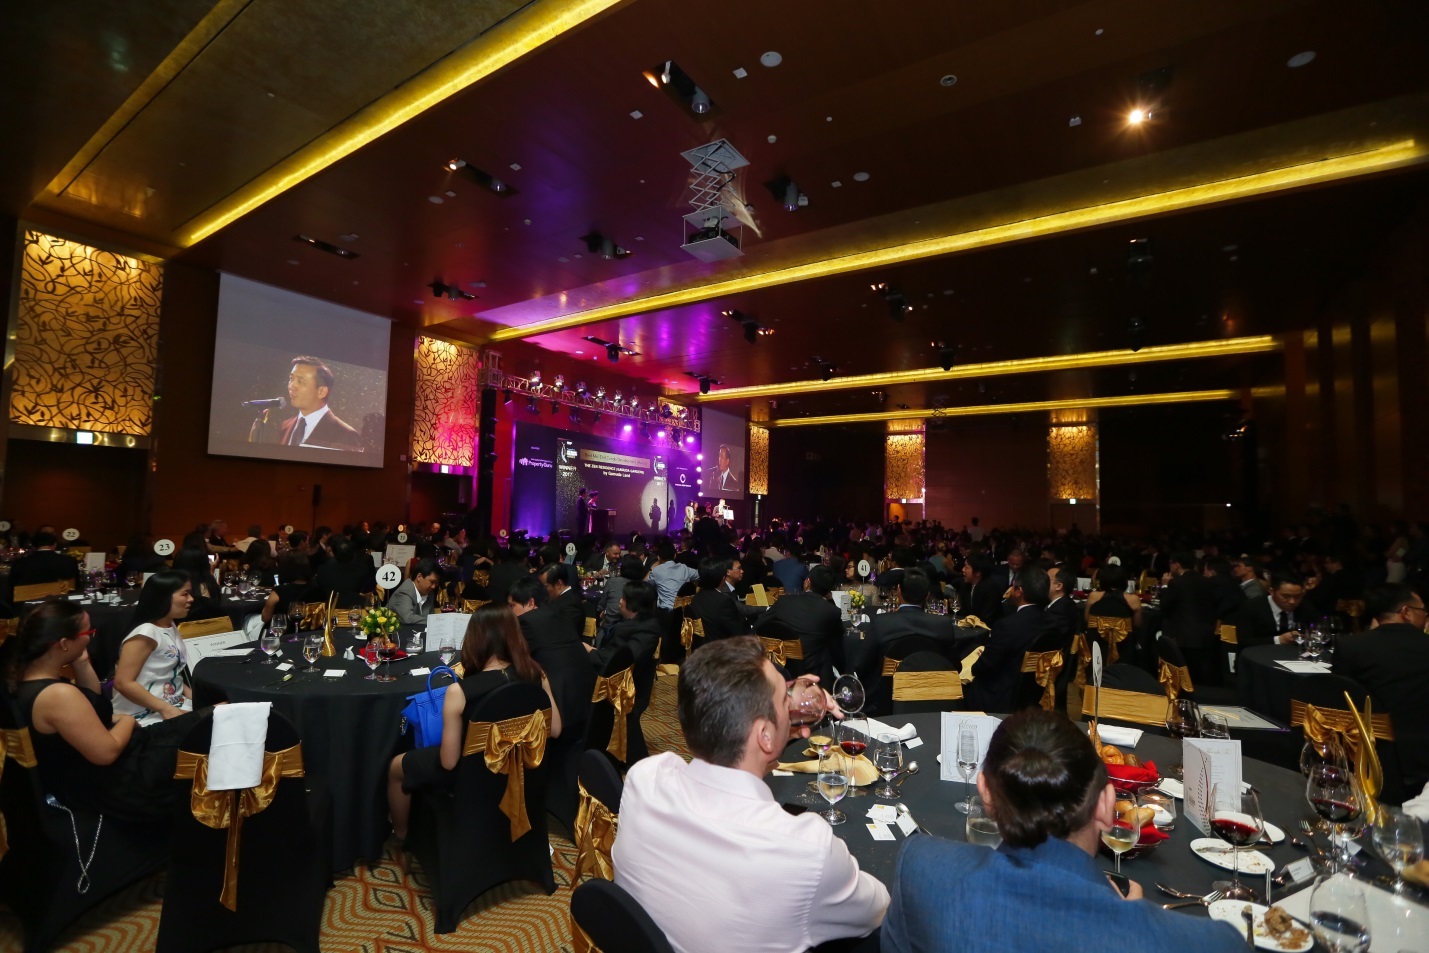 Vietnamese winners march on to conquer PropertyGuru Asia Property Awards in November